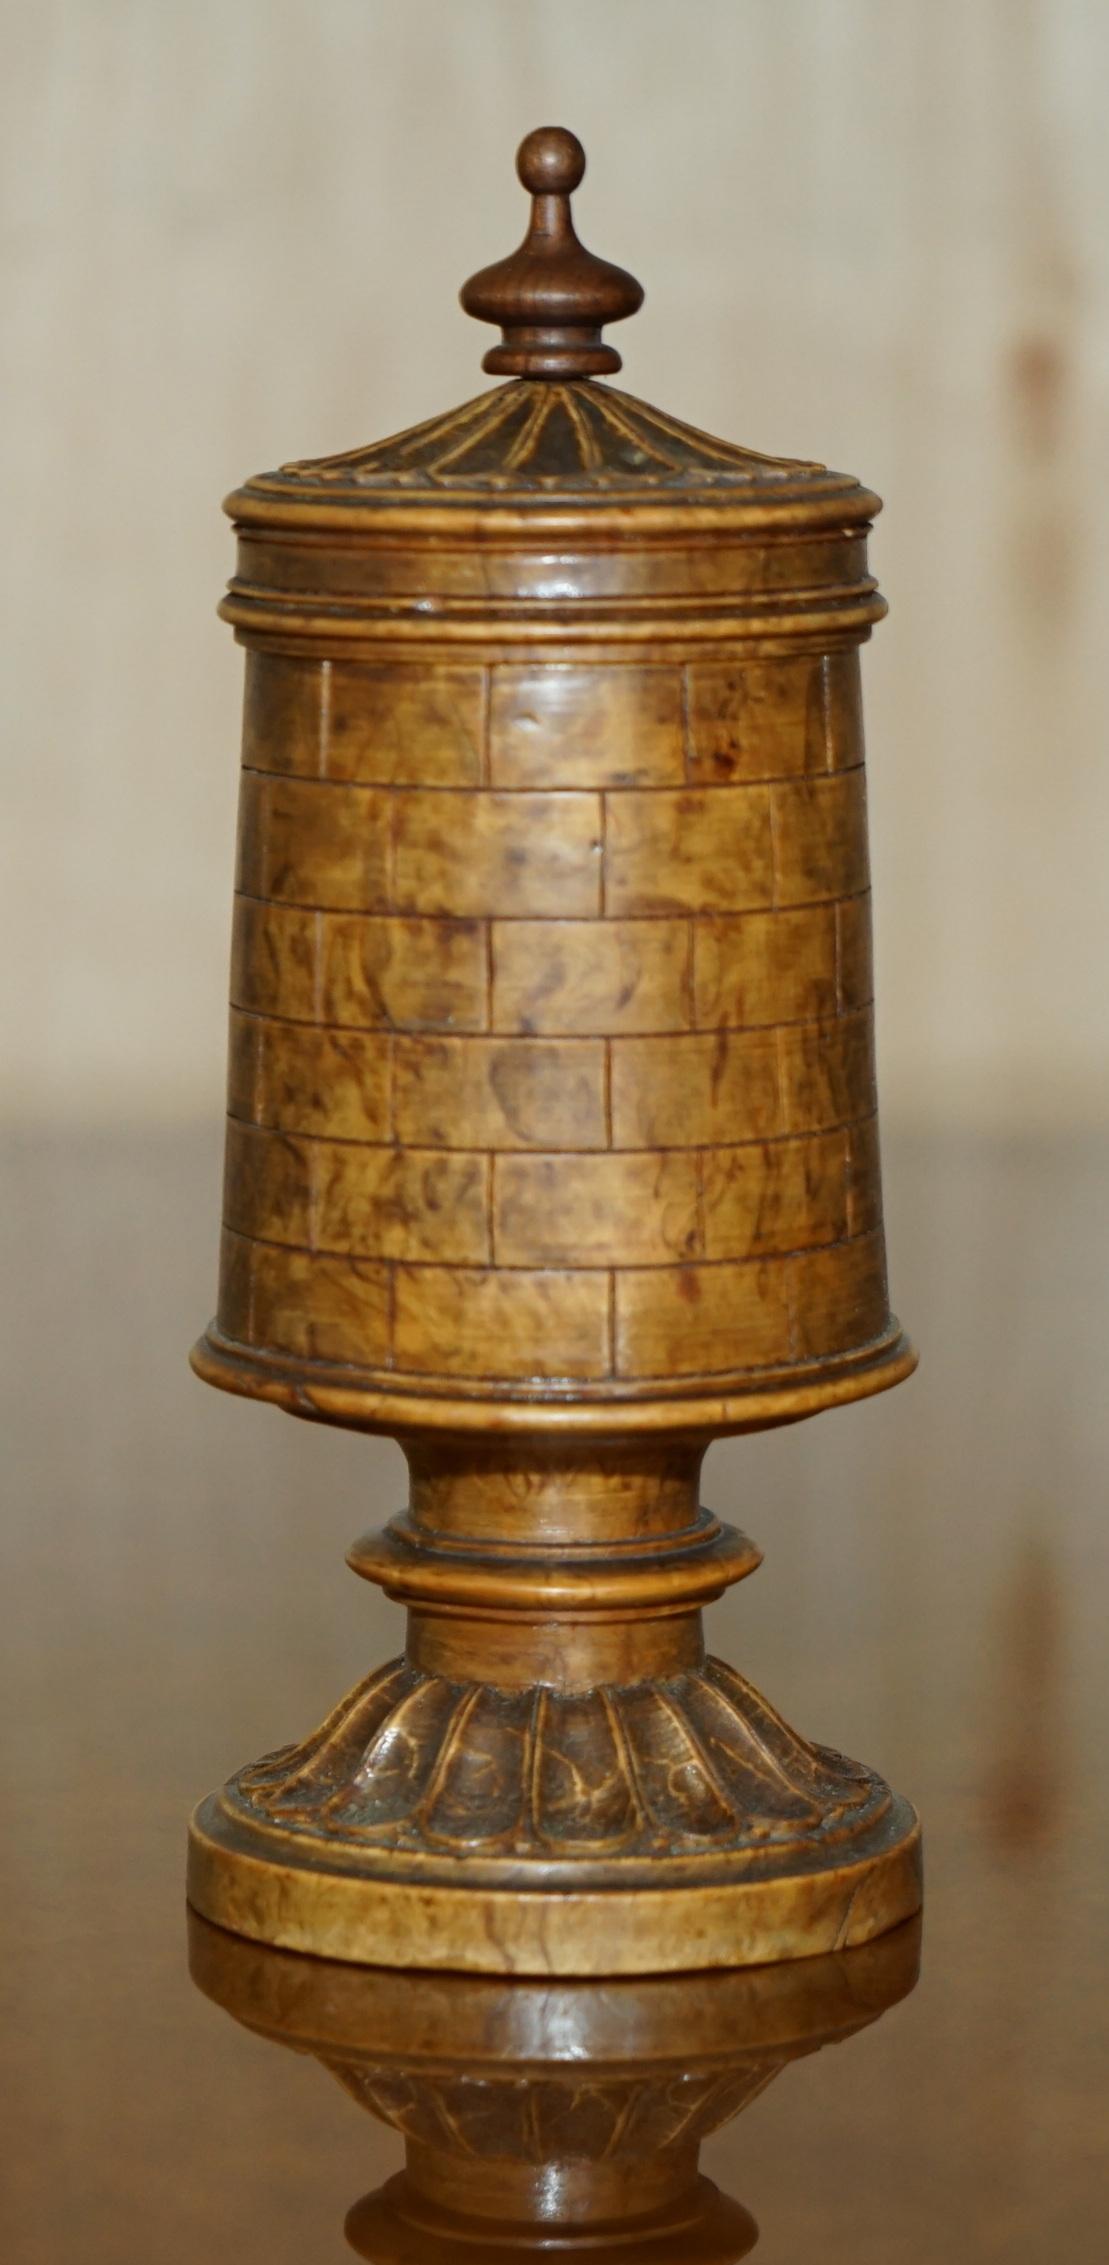 Royal House Antiques

Royal House Antiques is delighted to offer for sale this super rare 18th century hand carved cycling pot in the form of a Chess rook or castle which holds a period chess set 

Please note the delivery fee listed is just a